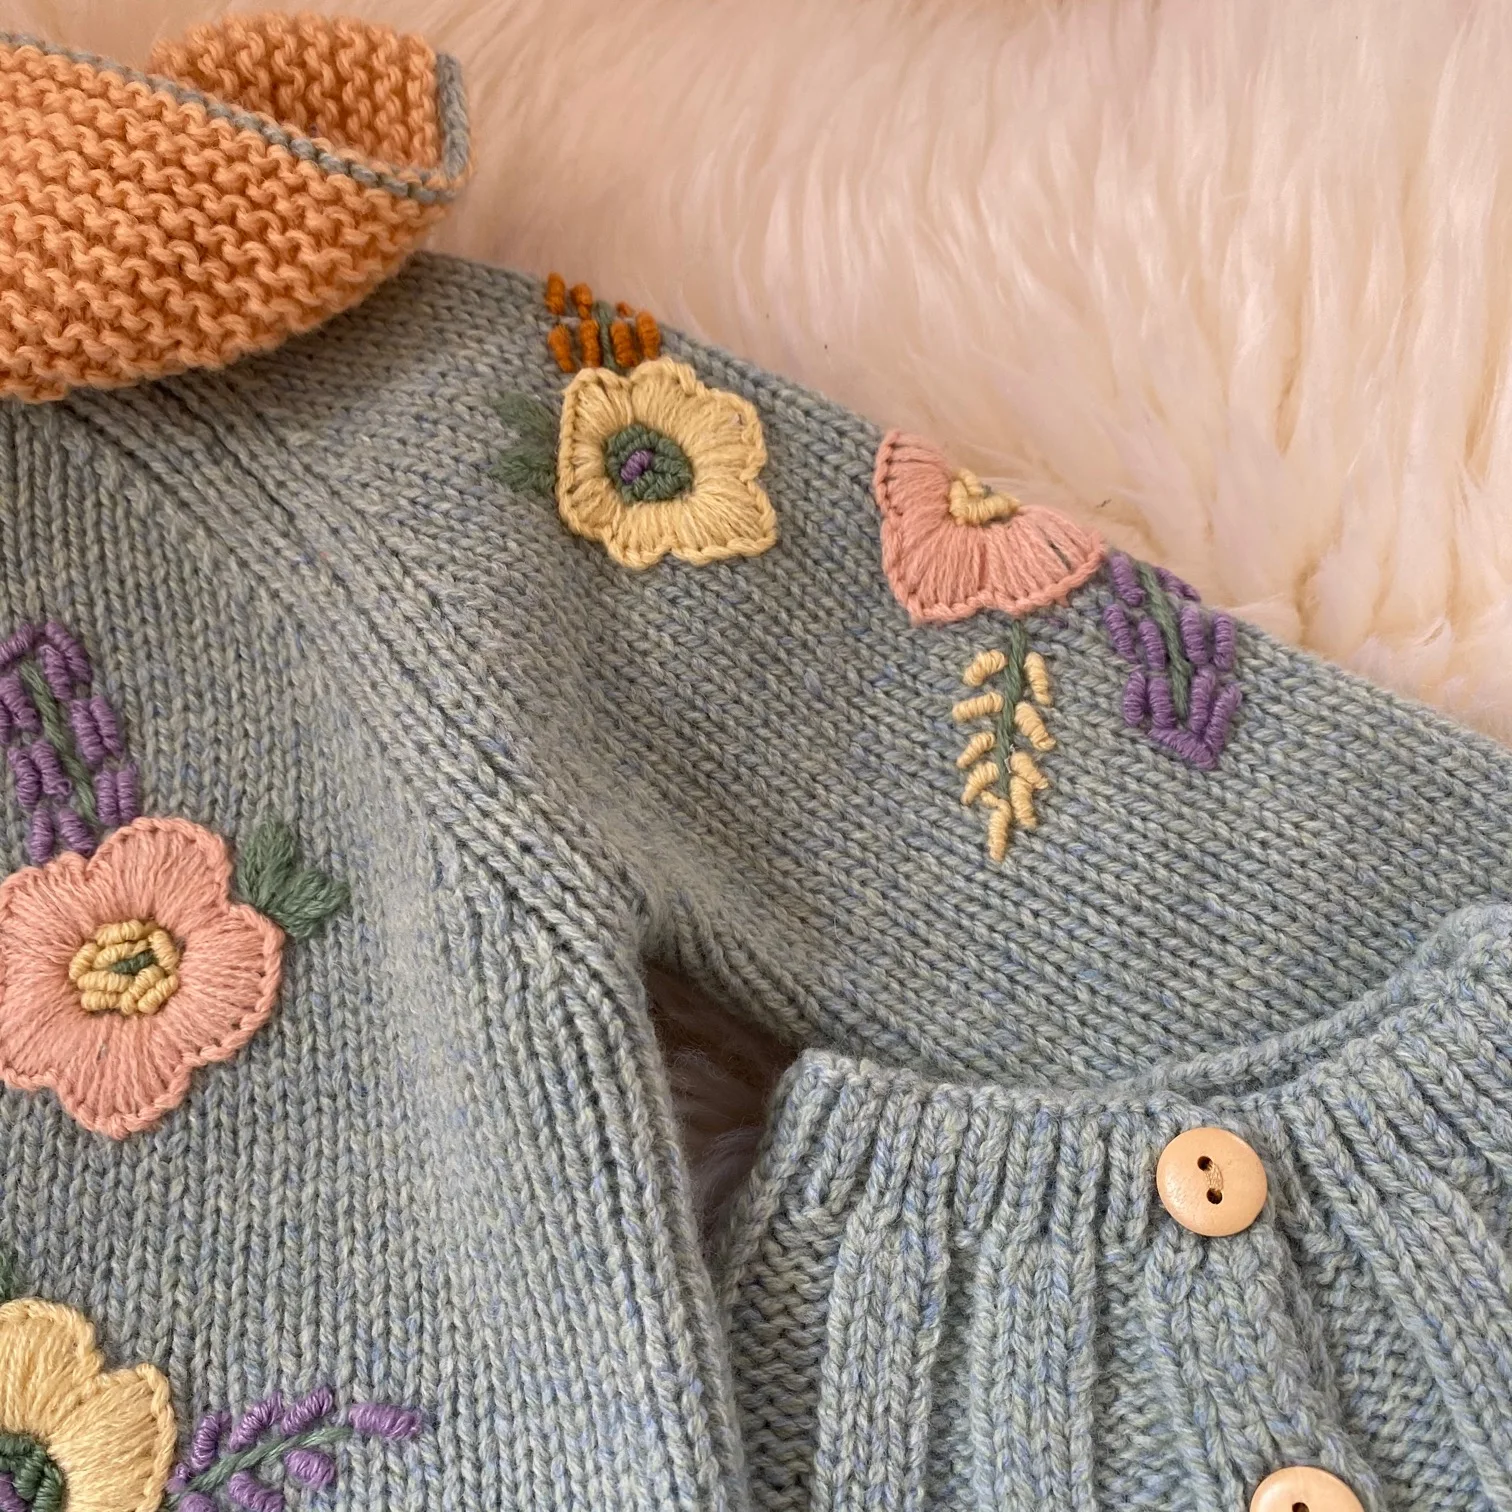 Kids Wool Sweaters Kalinka Brand New Spring Girls Flower Embroidery Knit Sweaters Pullover Baby Child Fashion Clothes Outwear Baby Clothing Set cheap